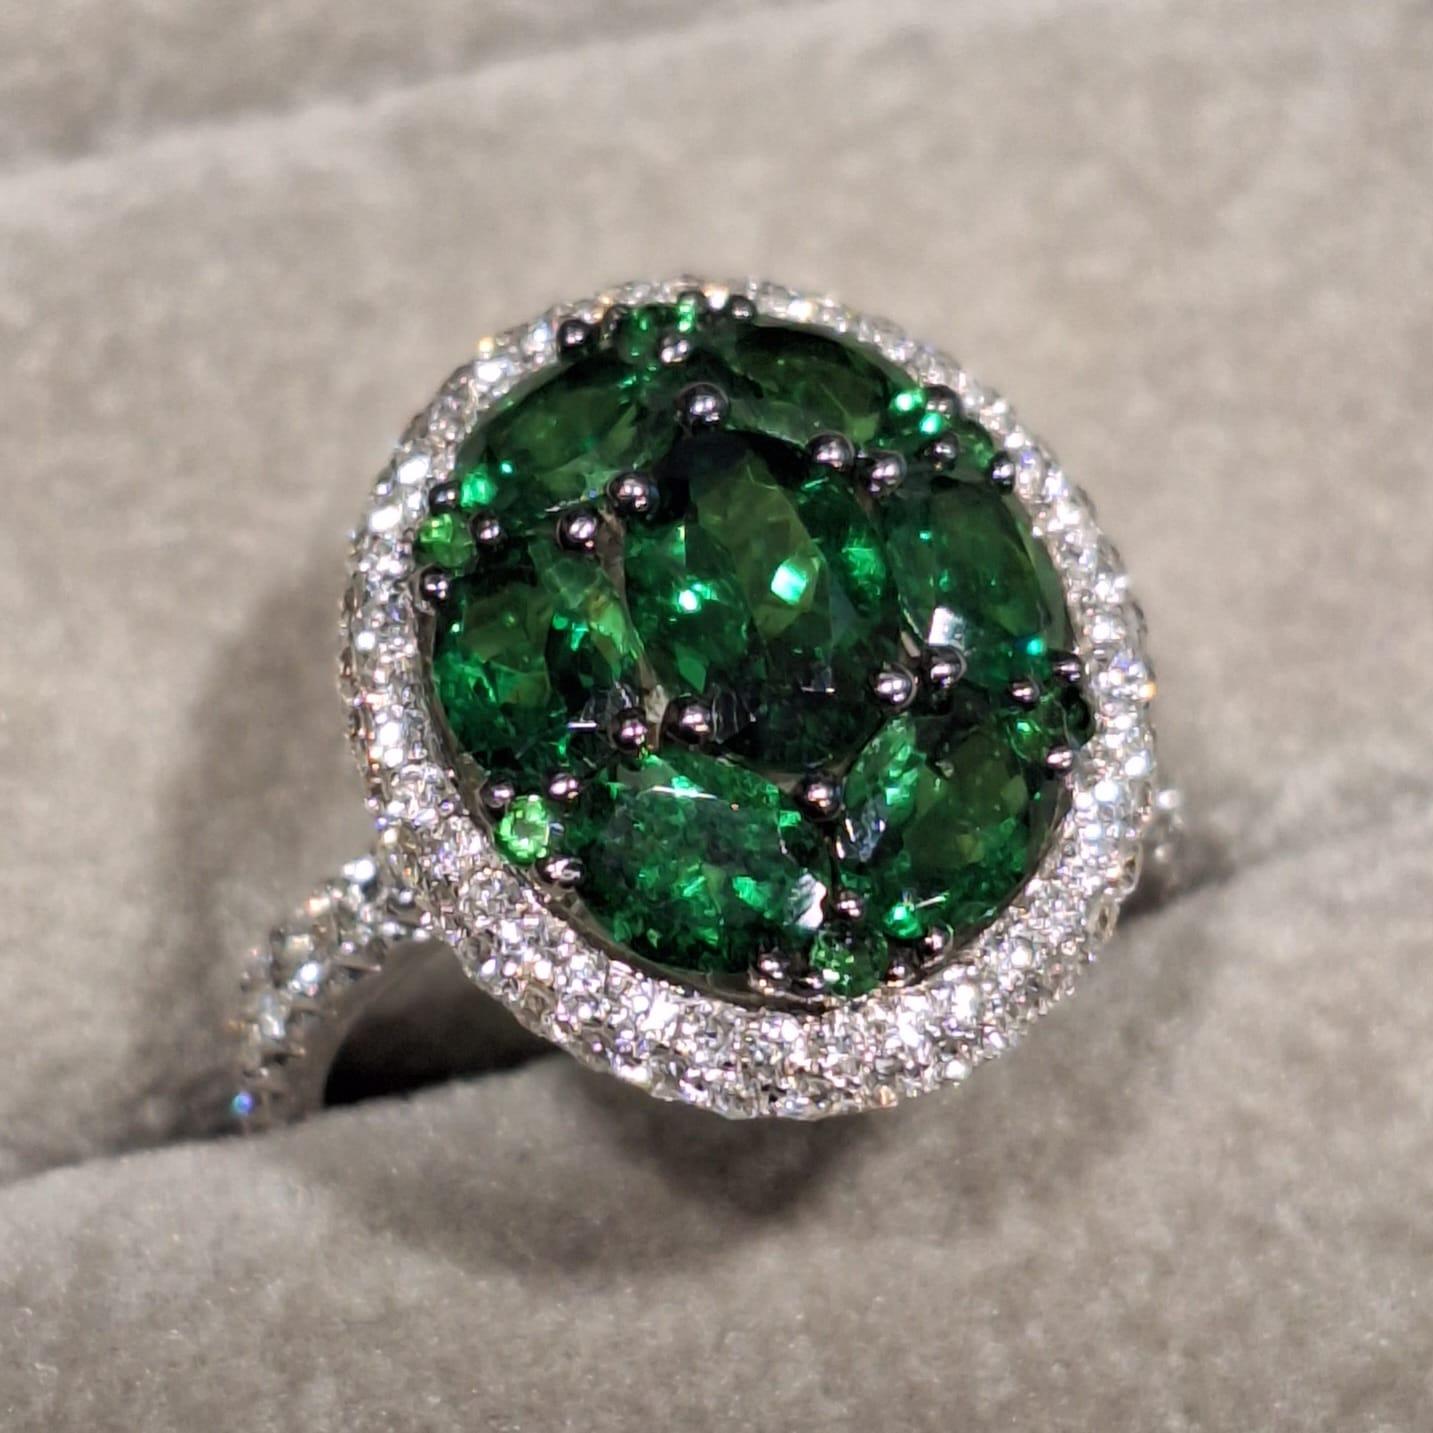 18K White Gold Diamond Ring with Tsavorite

Tsavorite of benevolence, vitality, prosperity, vigor and compassion. It is believed to be the gemstone that helps one discover the beauty within themselves and others.

Diamonds symbolise clarity and